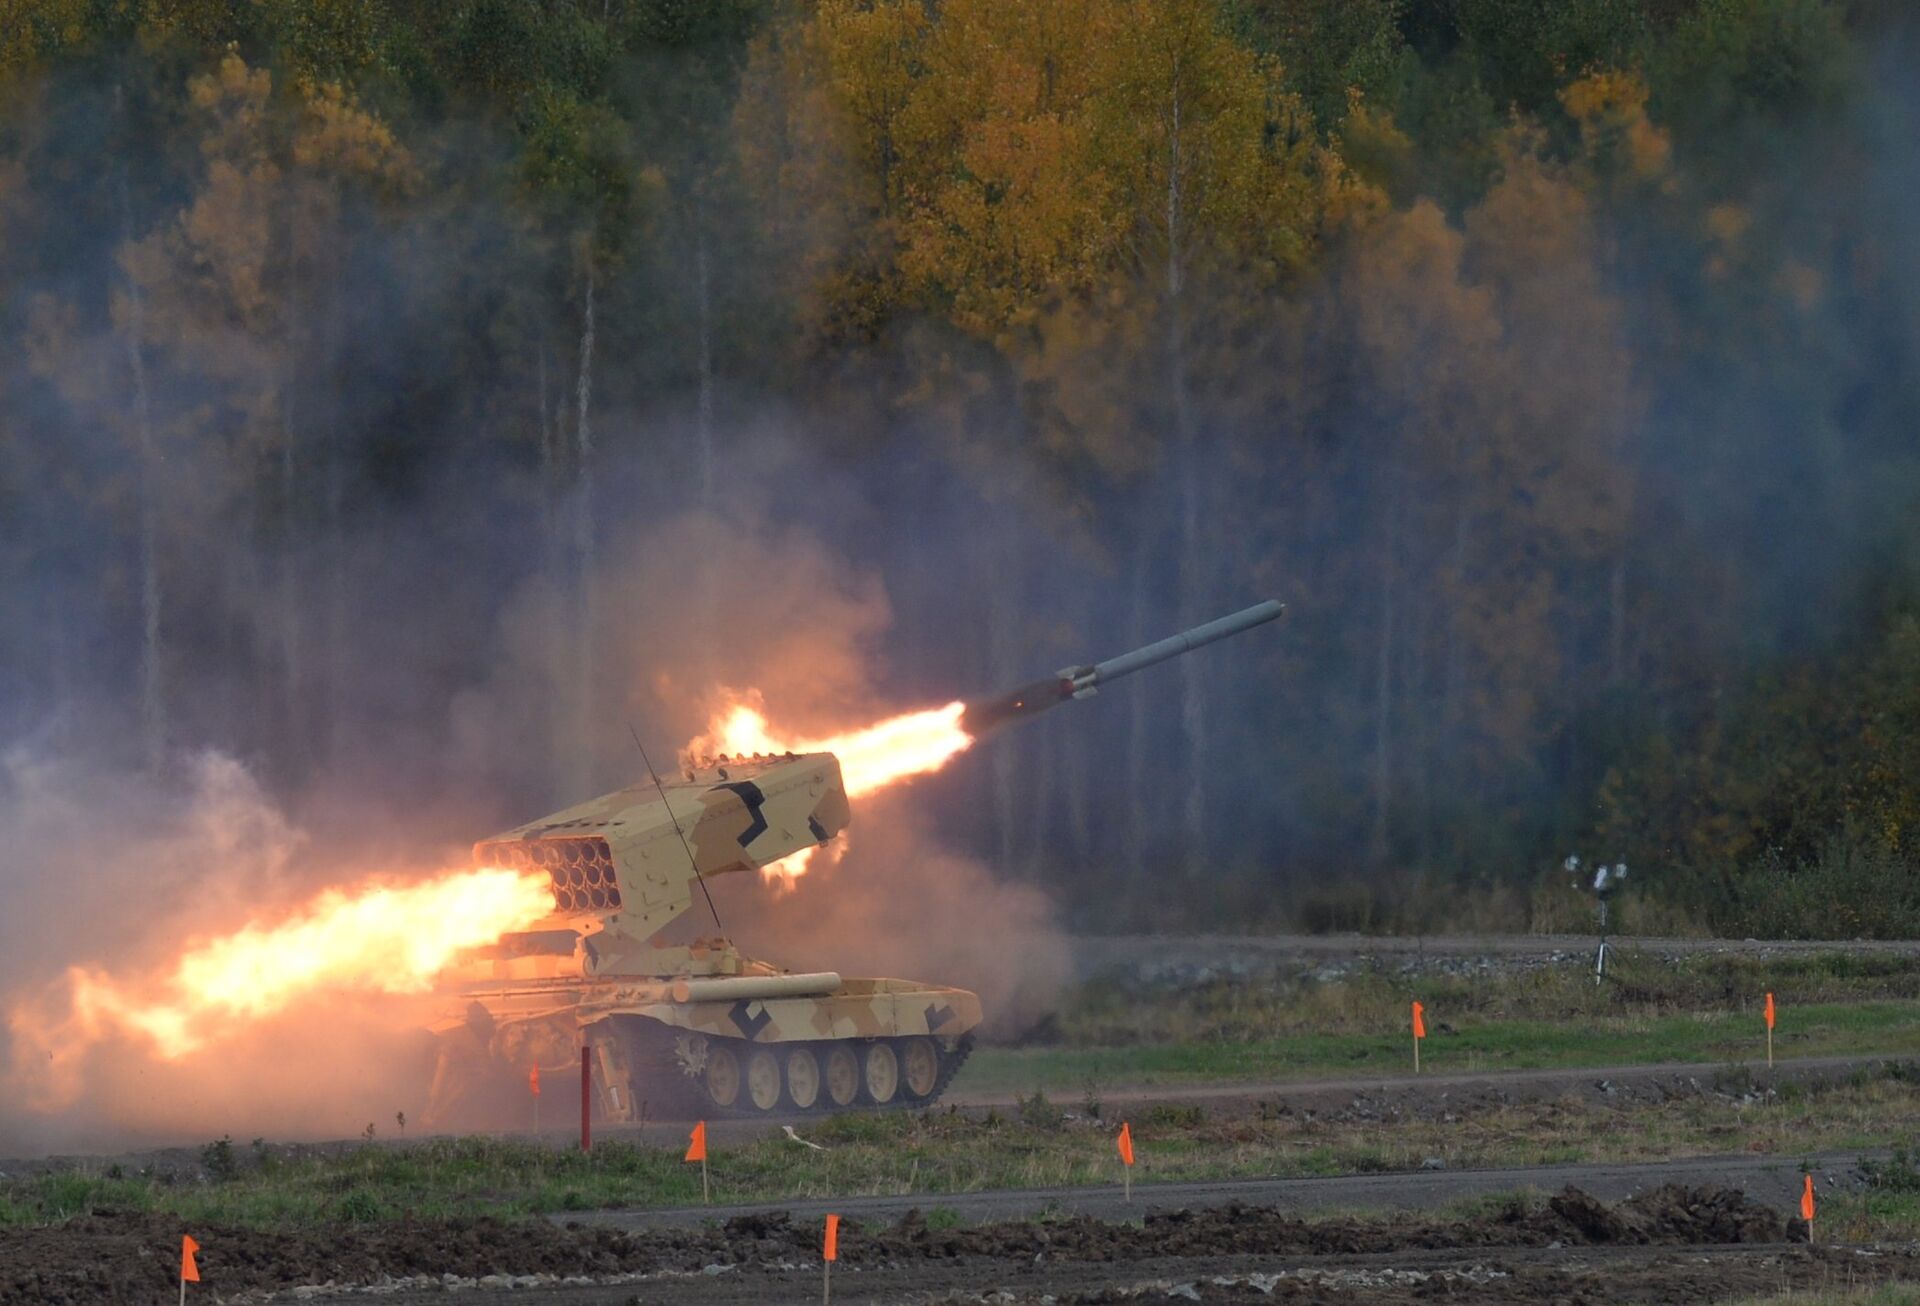 Heavy flamethrower system TOS-1A Solntsepyok during demonstration firing conducted at the 10th Russia Arms Expo international exhibition's opening - Sputnik International, 1920, 18.10.2023